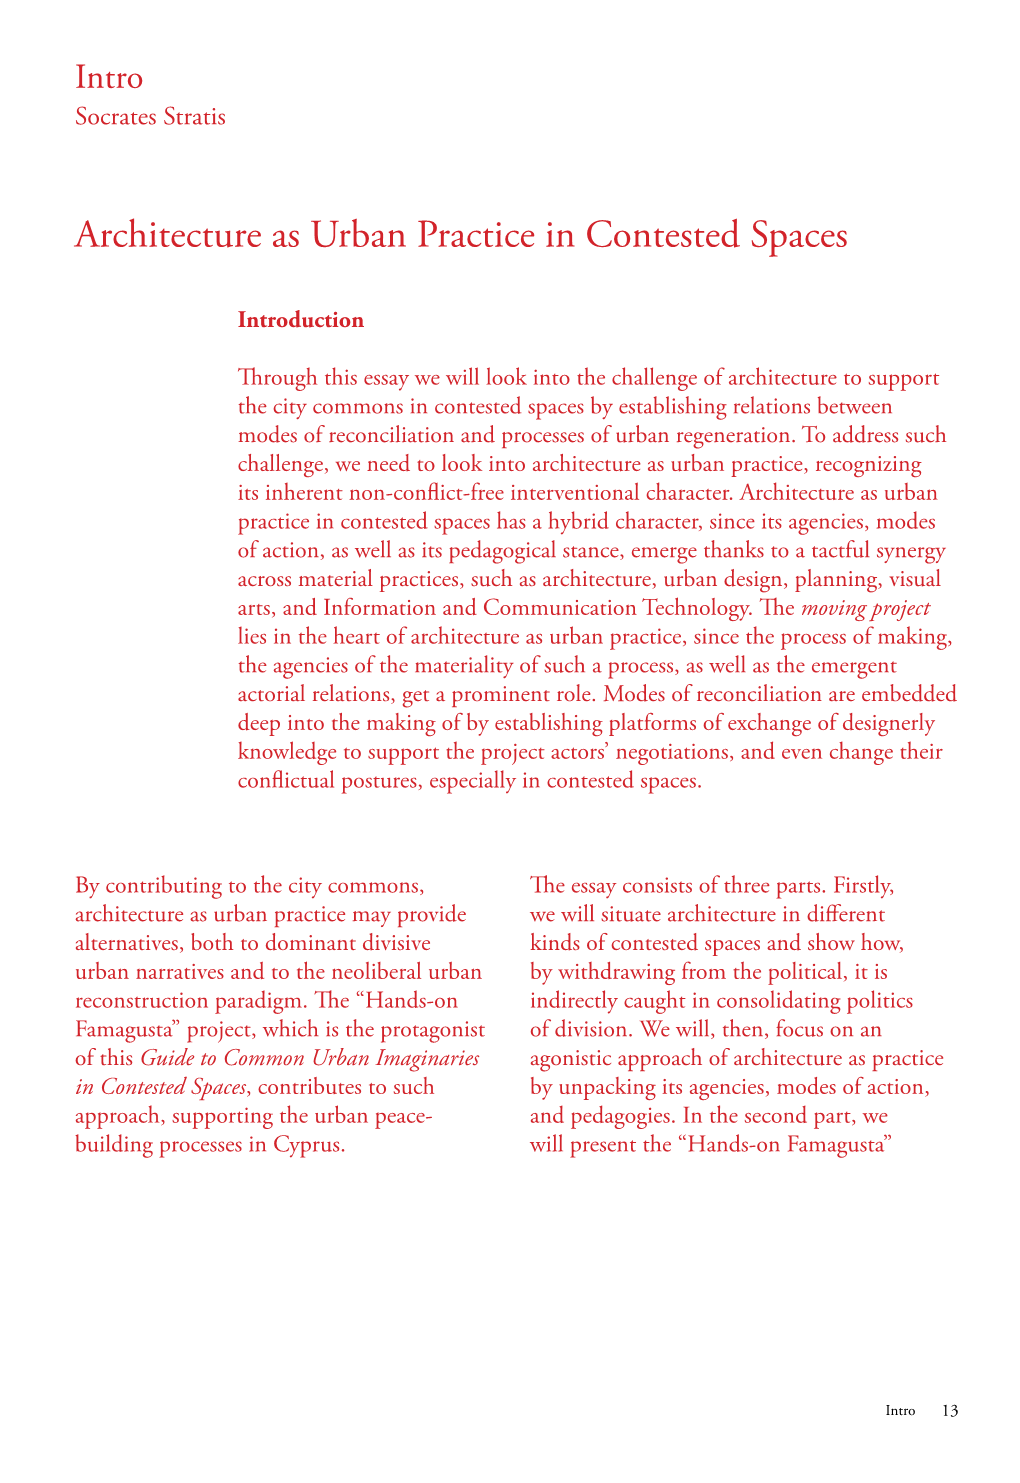 Architecture As Urban Practice in Contested Spaces